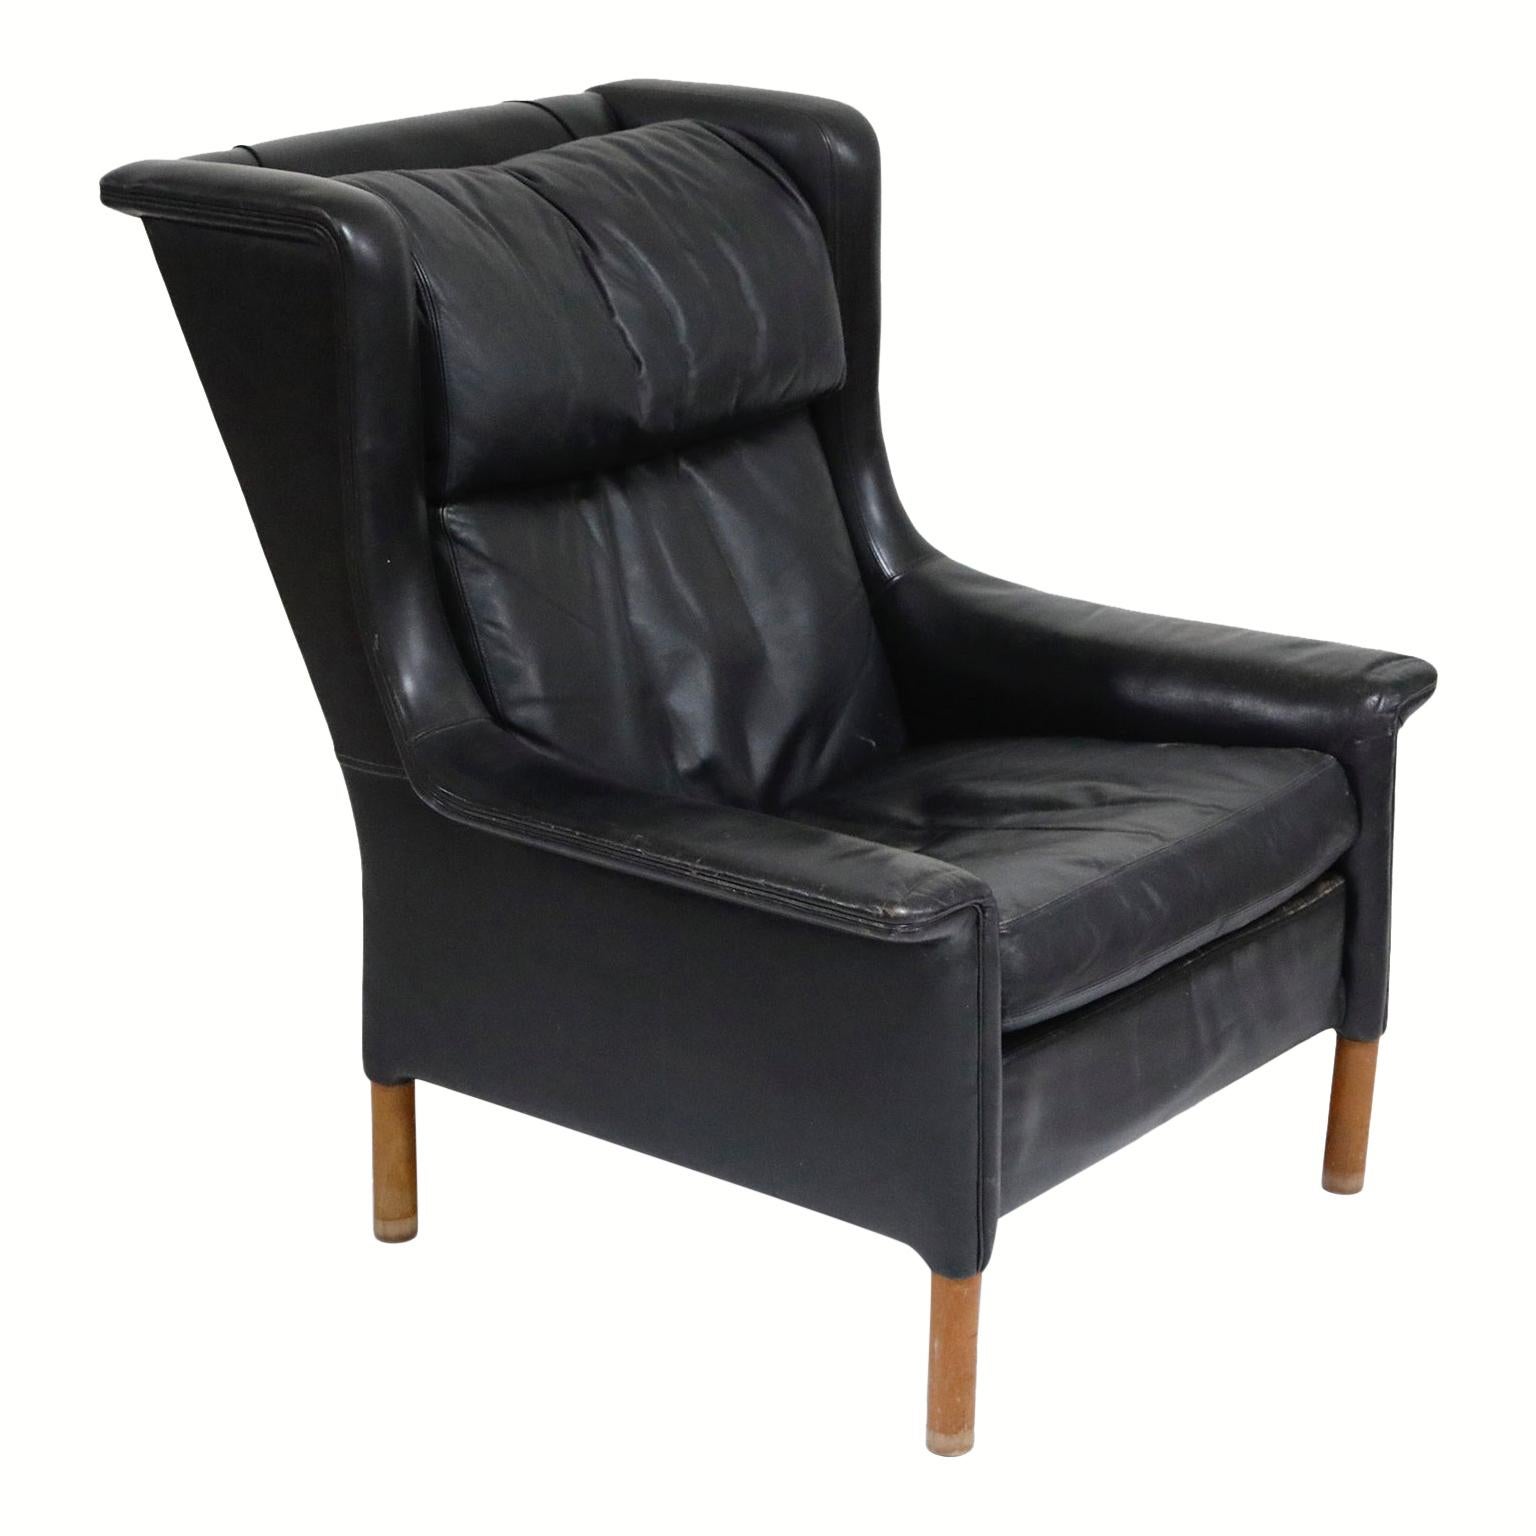 Black Leather Wingback Armchair by Gerhard Berg for Stokke Fabrikker, circa 1965